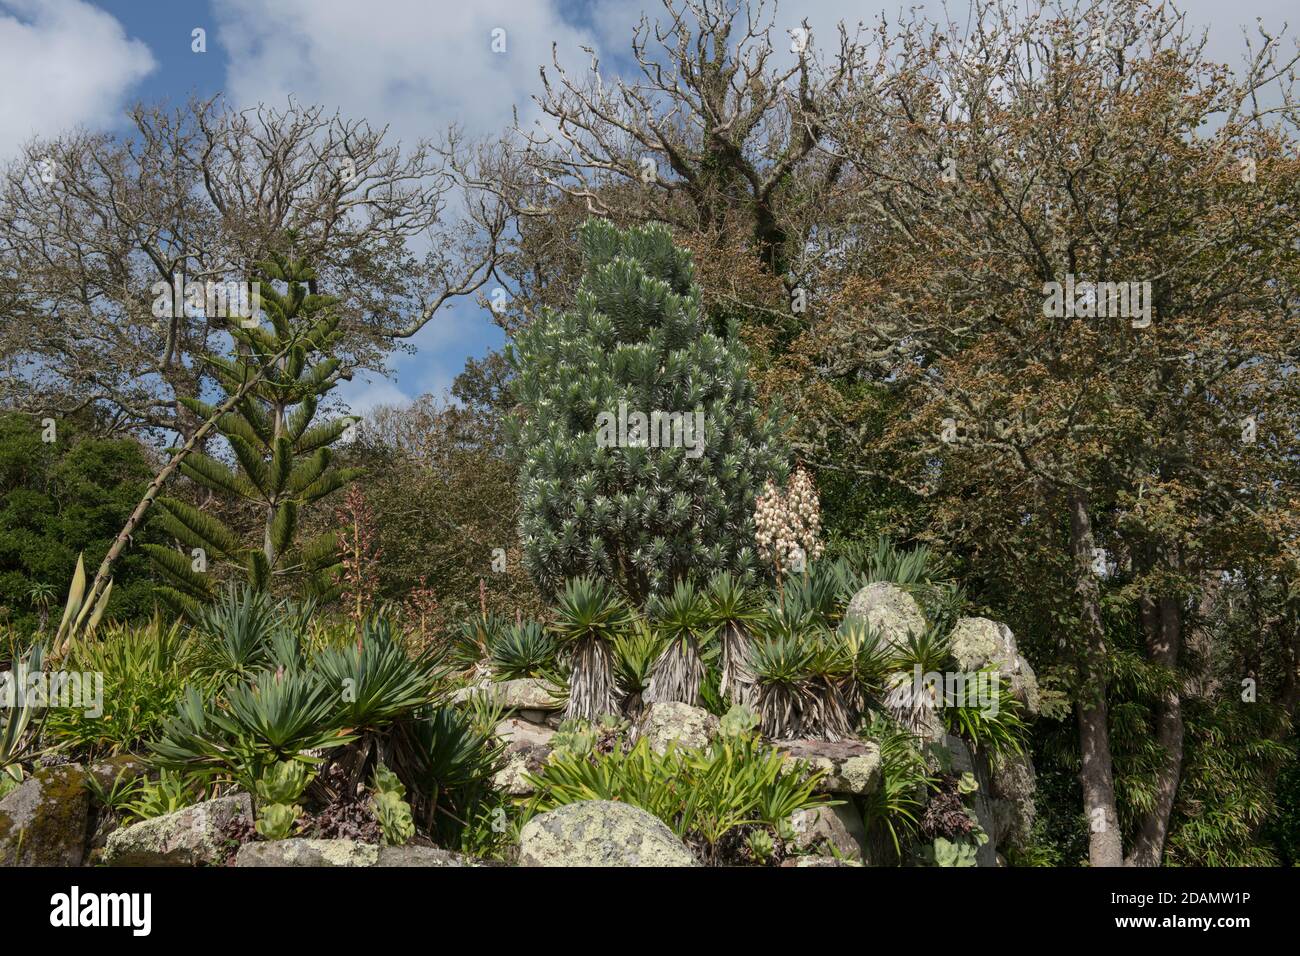 Rock Garden with a Silver Tree, Flowering Yucca Plant, Norfolk Island Pine and Succulent Palms on the Island of Tresco in the Isles of Scilly, England Stock Photo